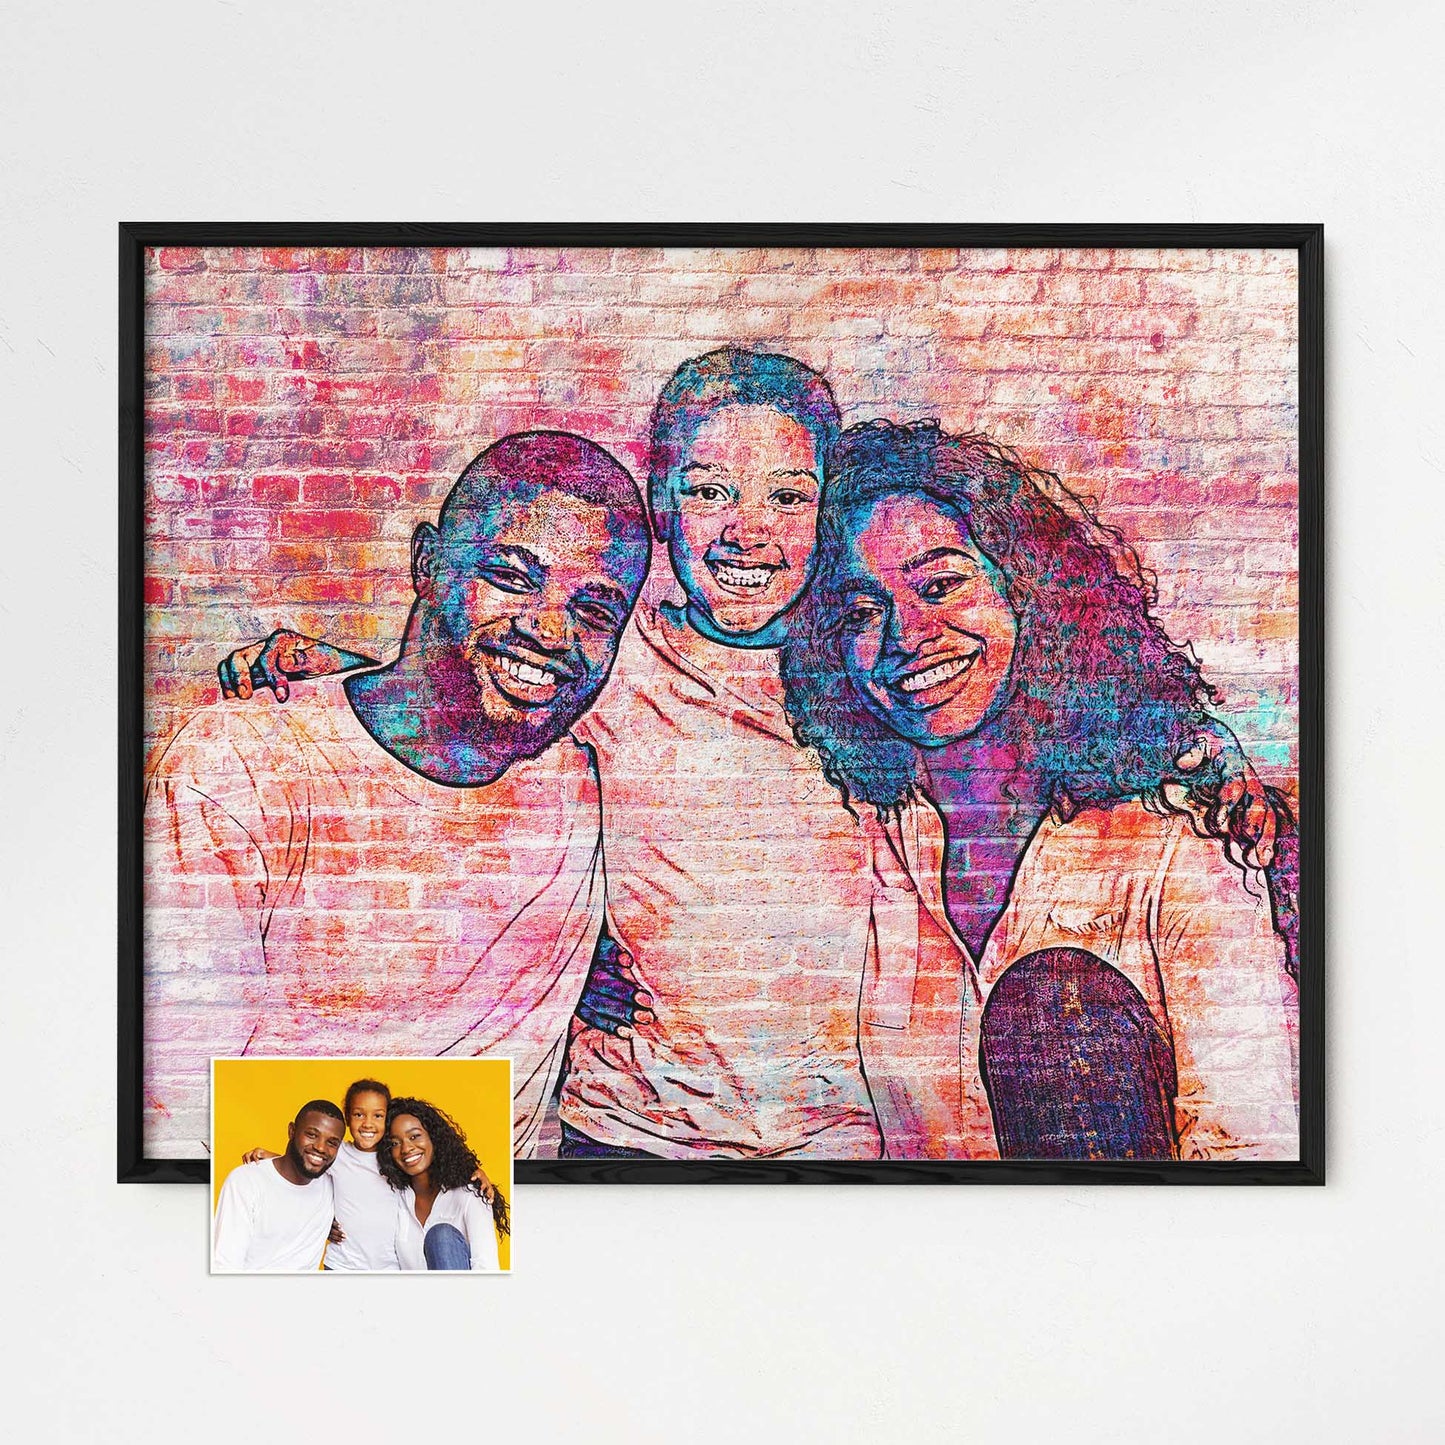 Transform your space with our Personalised Brick Graffiti Street Art Framed Print. The combination of urban elements, vibrant colors, and unique design creates a captivating piece of art that will enhance your home decor